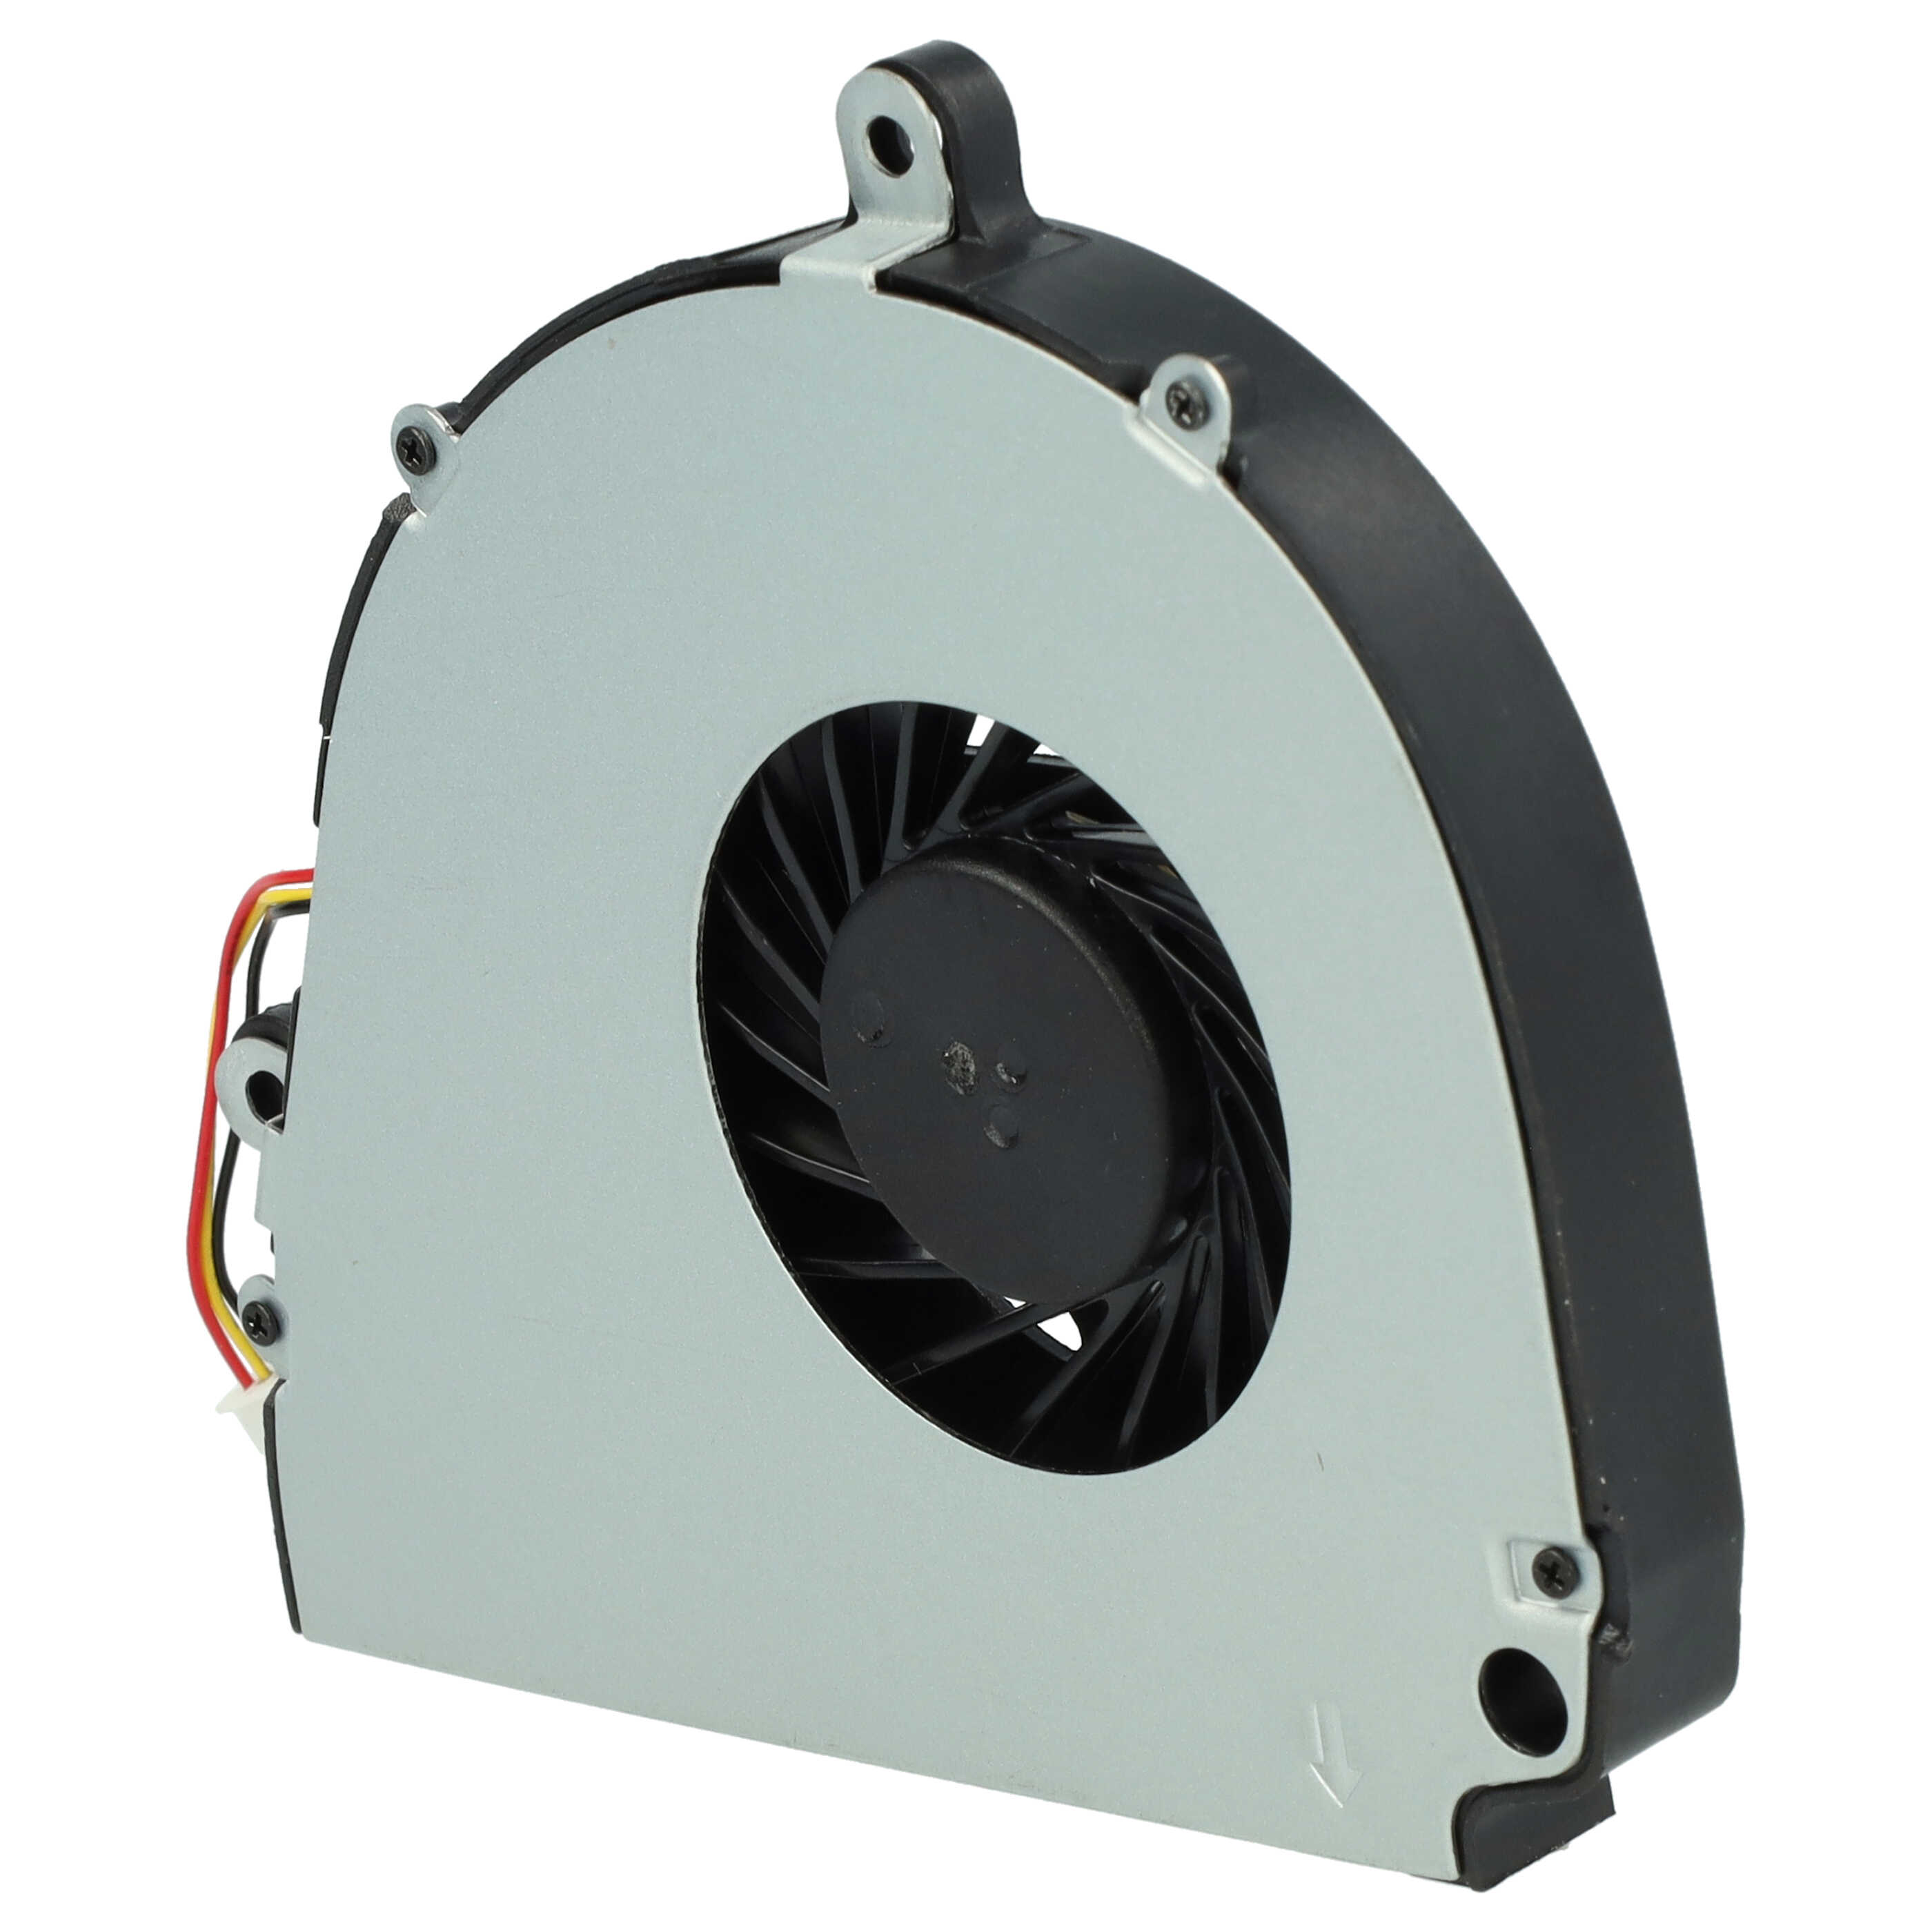 CPU / GPU Fan suitable for Acer Aspire V3-571G Notebook 91 x 84 x 11 mm